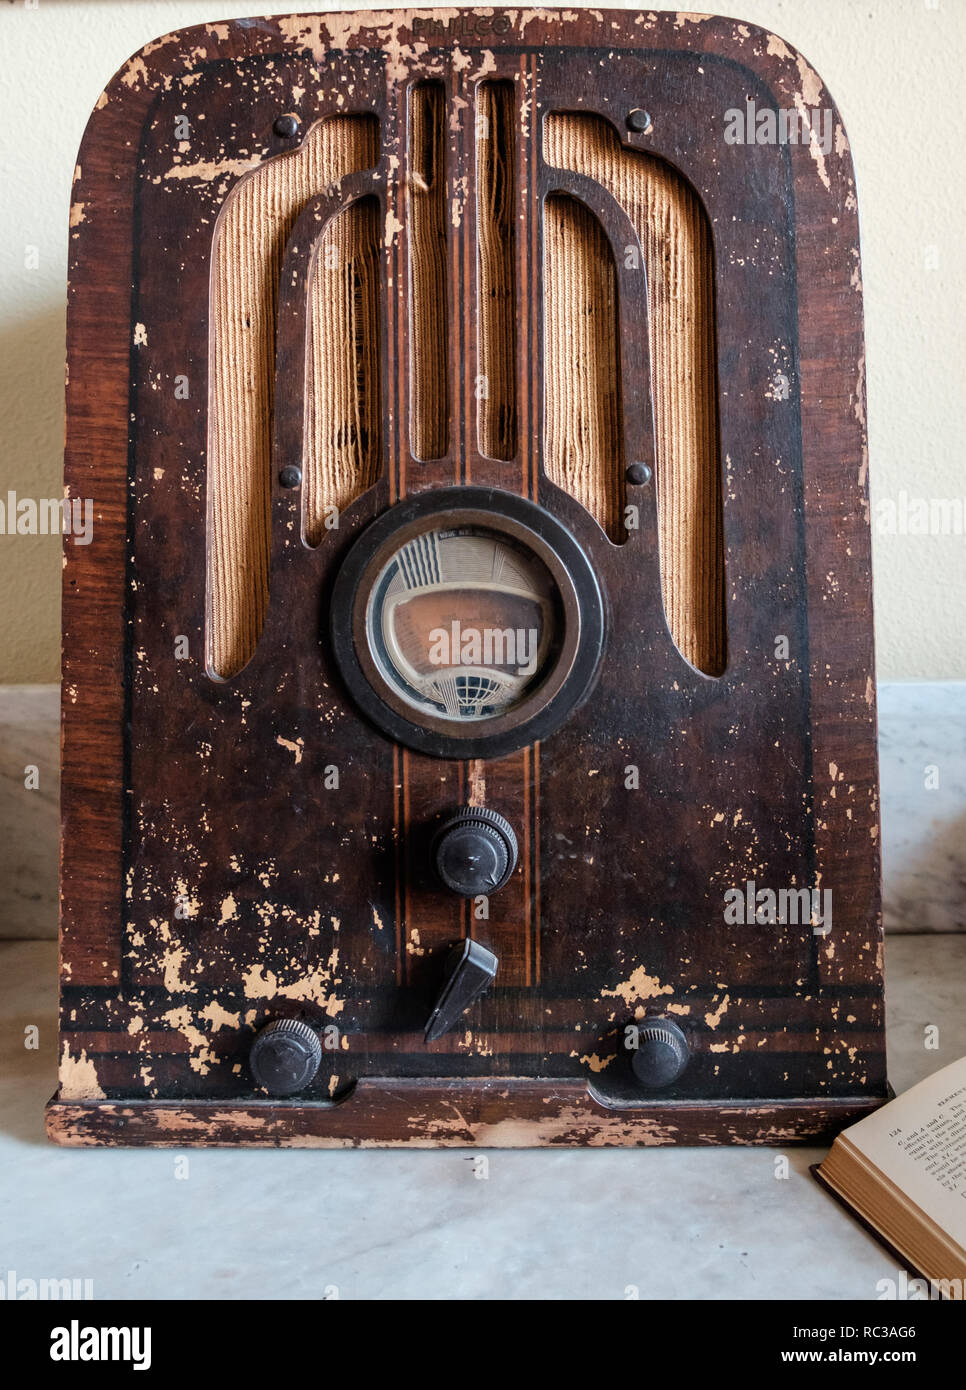 Antique Philco tombstone tube radio in wooden case model 37-620. Beat up vintage tabletop 1937 radio with part of open book in front. Stock Photo